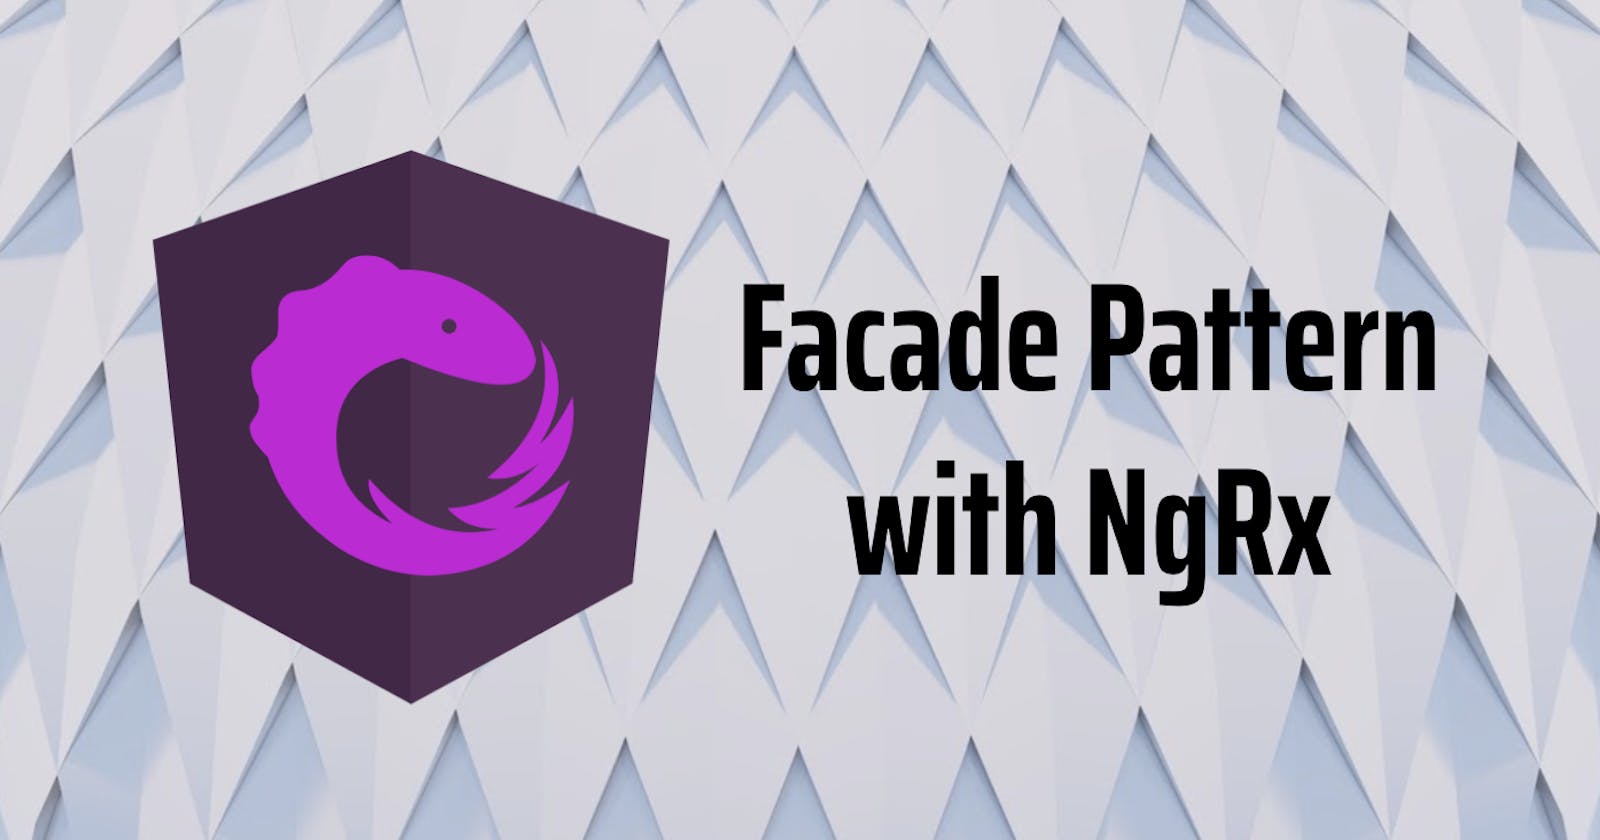 The Benefits of Using a Facade Service When Using NGRX